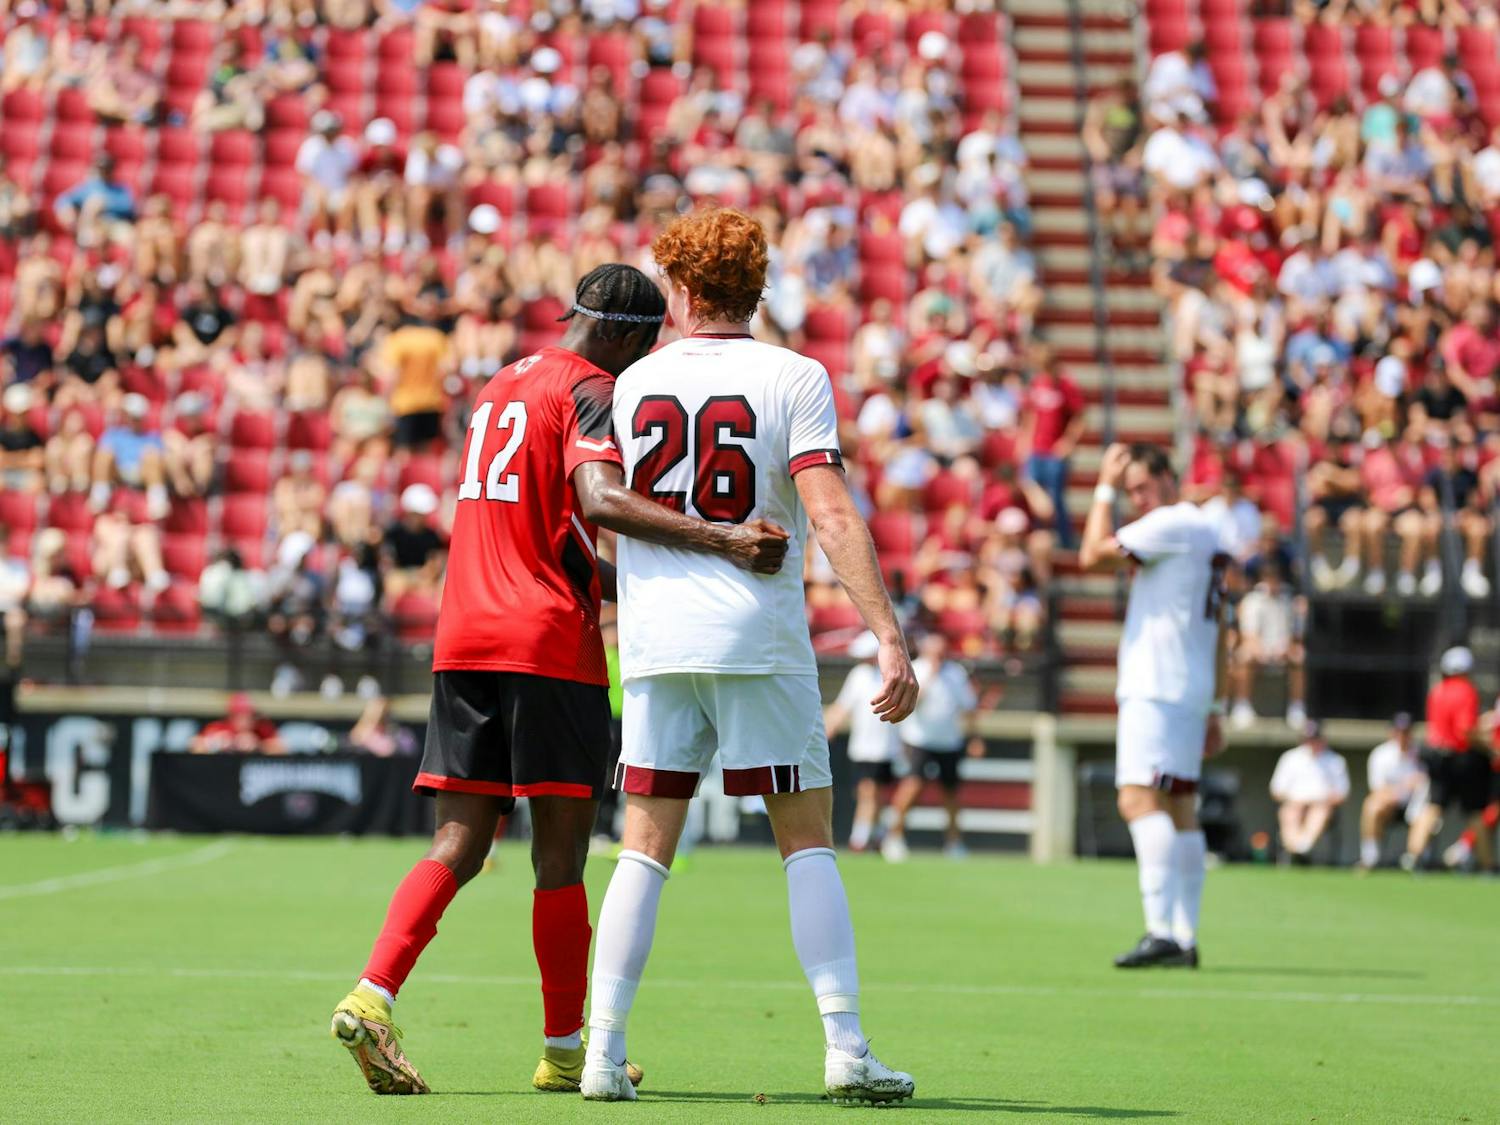 Senior forward Adam Luckhurst walks with a Gardner-Webb player during a water break on Aug. 27, 2023. The late August game was moved up due to the threat of rain and played in over 90-degree temperatures.